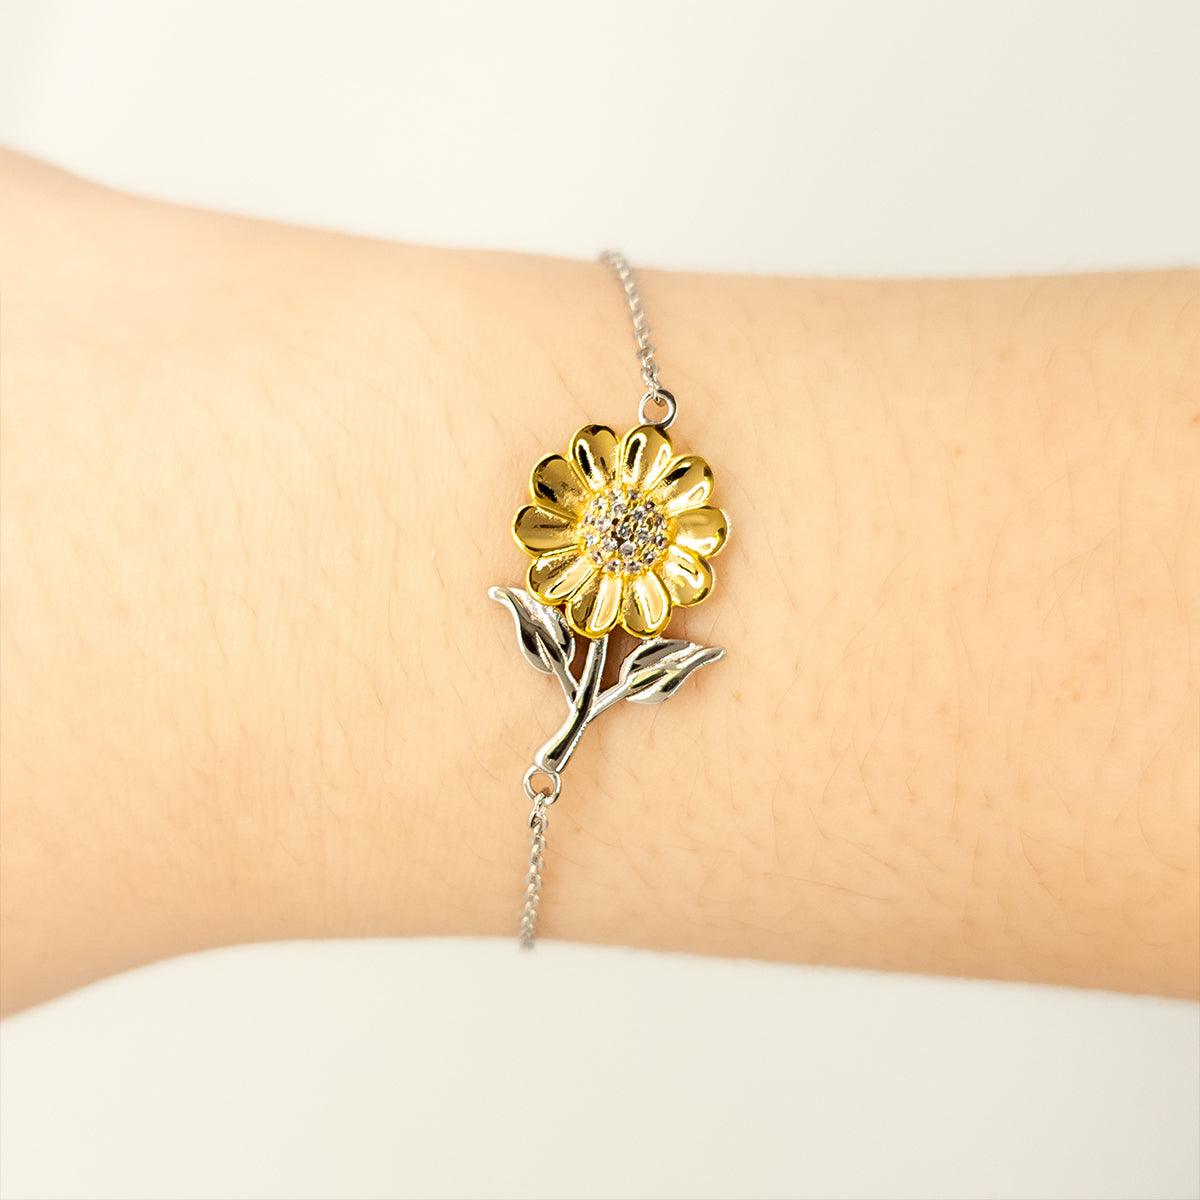 Remarkable Linguist Gifts, Your dedication and hard work, Inspirational Birthday Christmas Unique Sunflower Bracelet For Linguist, Coworkers, Men, Women, Friends - Mallard Moon Gift Shop